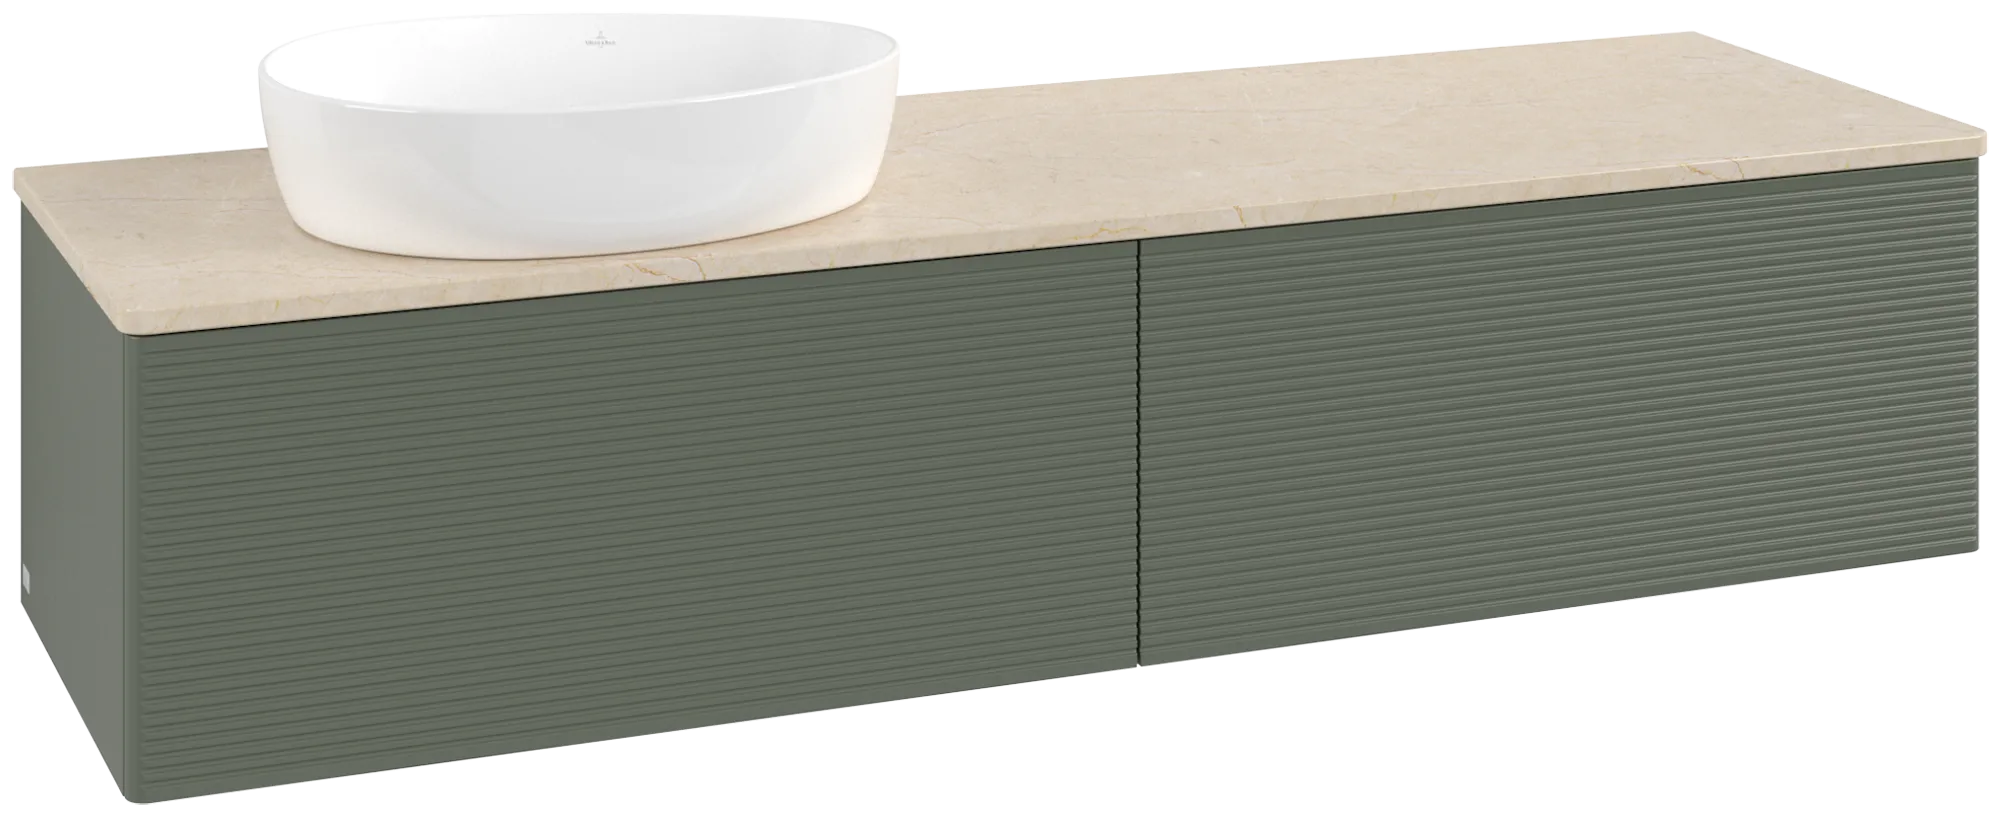 Зображення з  VILLEROY BOCH Antao Vanity unit, with lighting, 2 pull-out compartments, 1600 x 360 x 500 mm, Front with grain texture, Leaf Green Matt Lacquer / Botticino #L37113HL